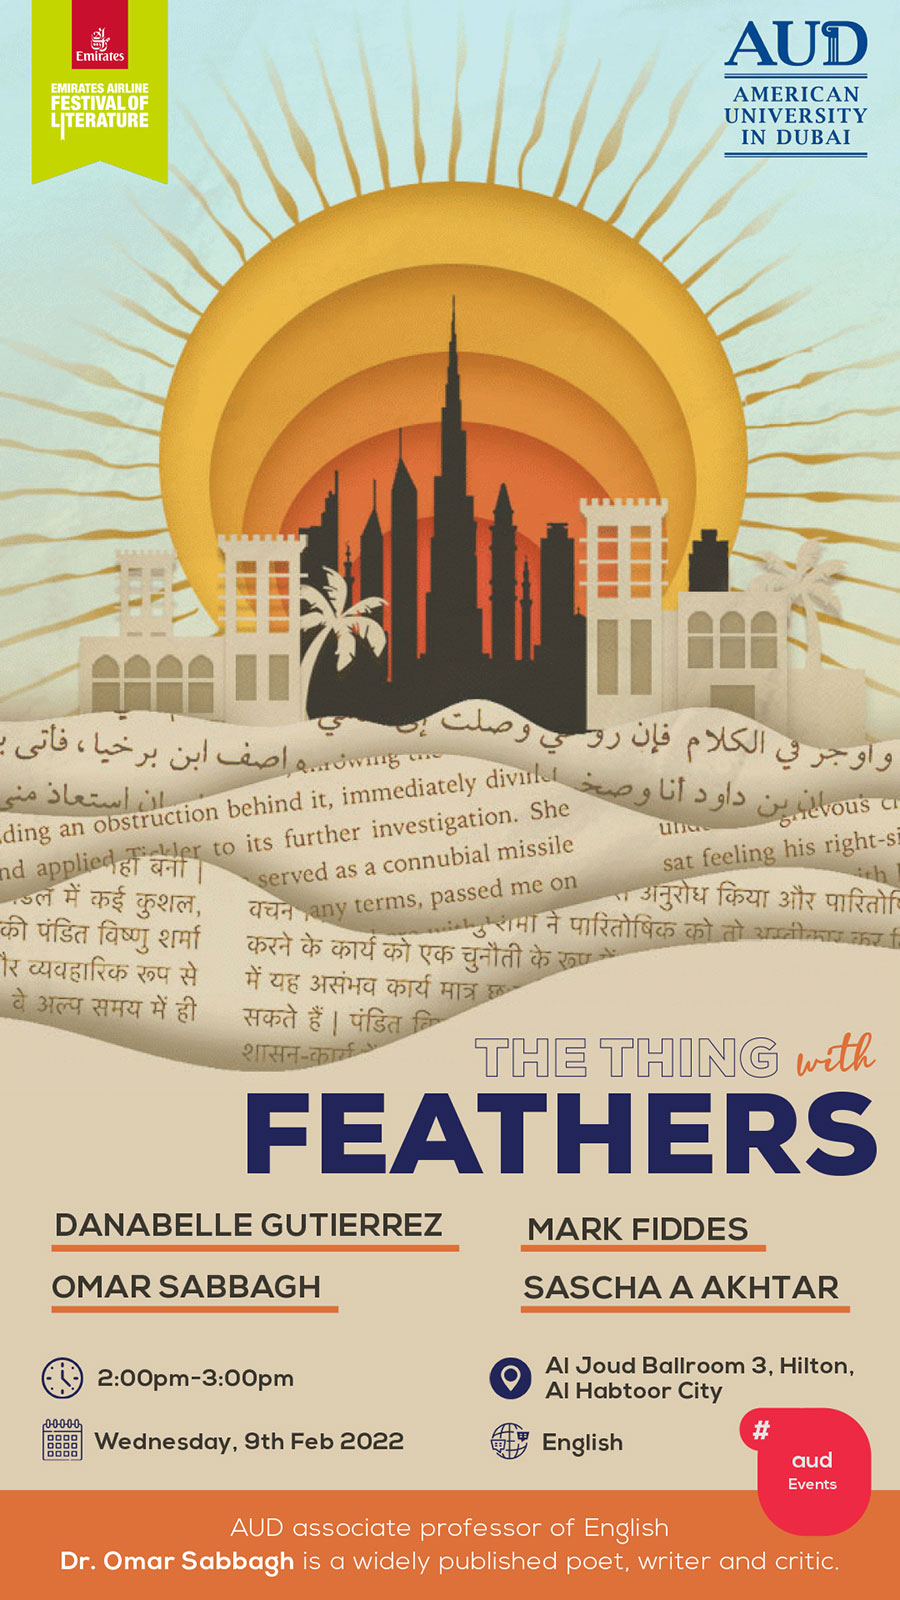 The Thing with Feathers - Emirates Airlines Festival of Literature